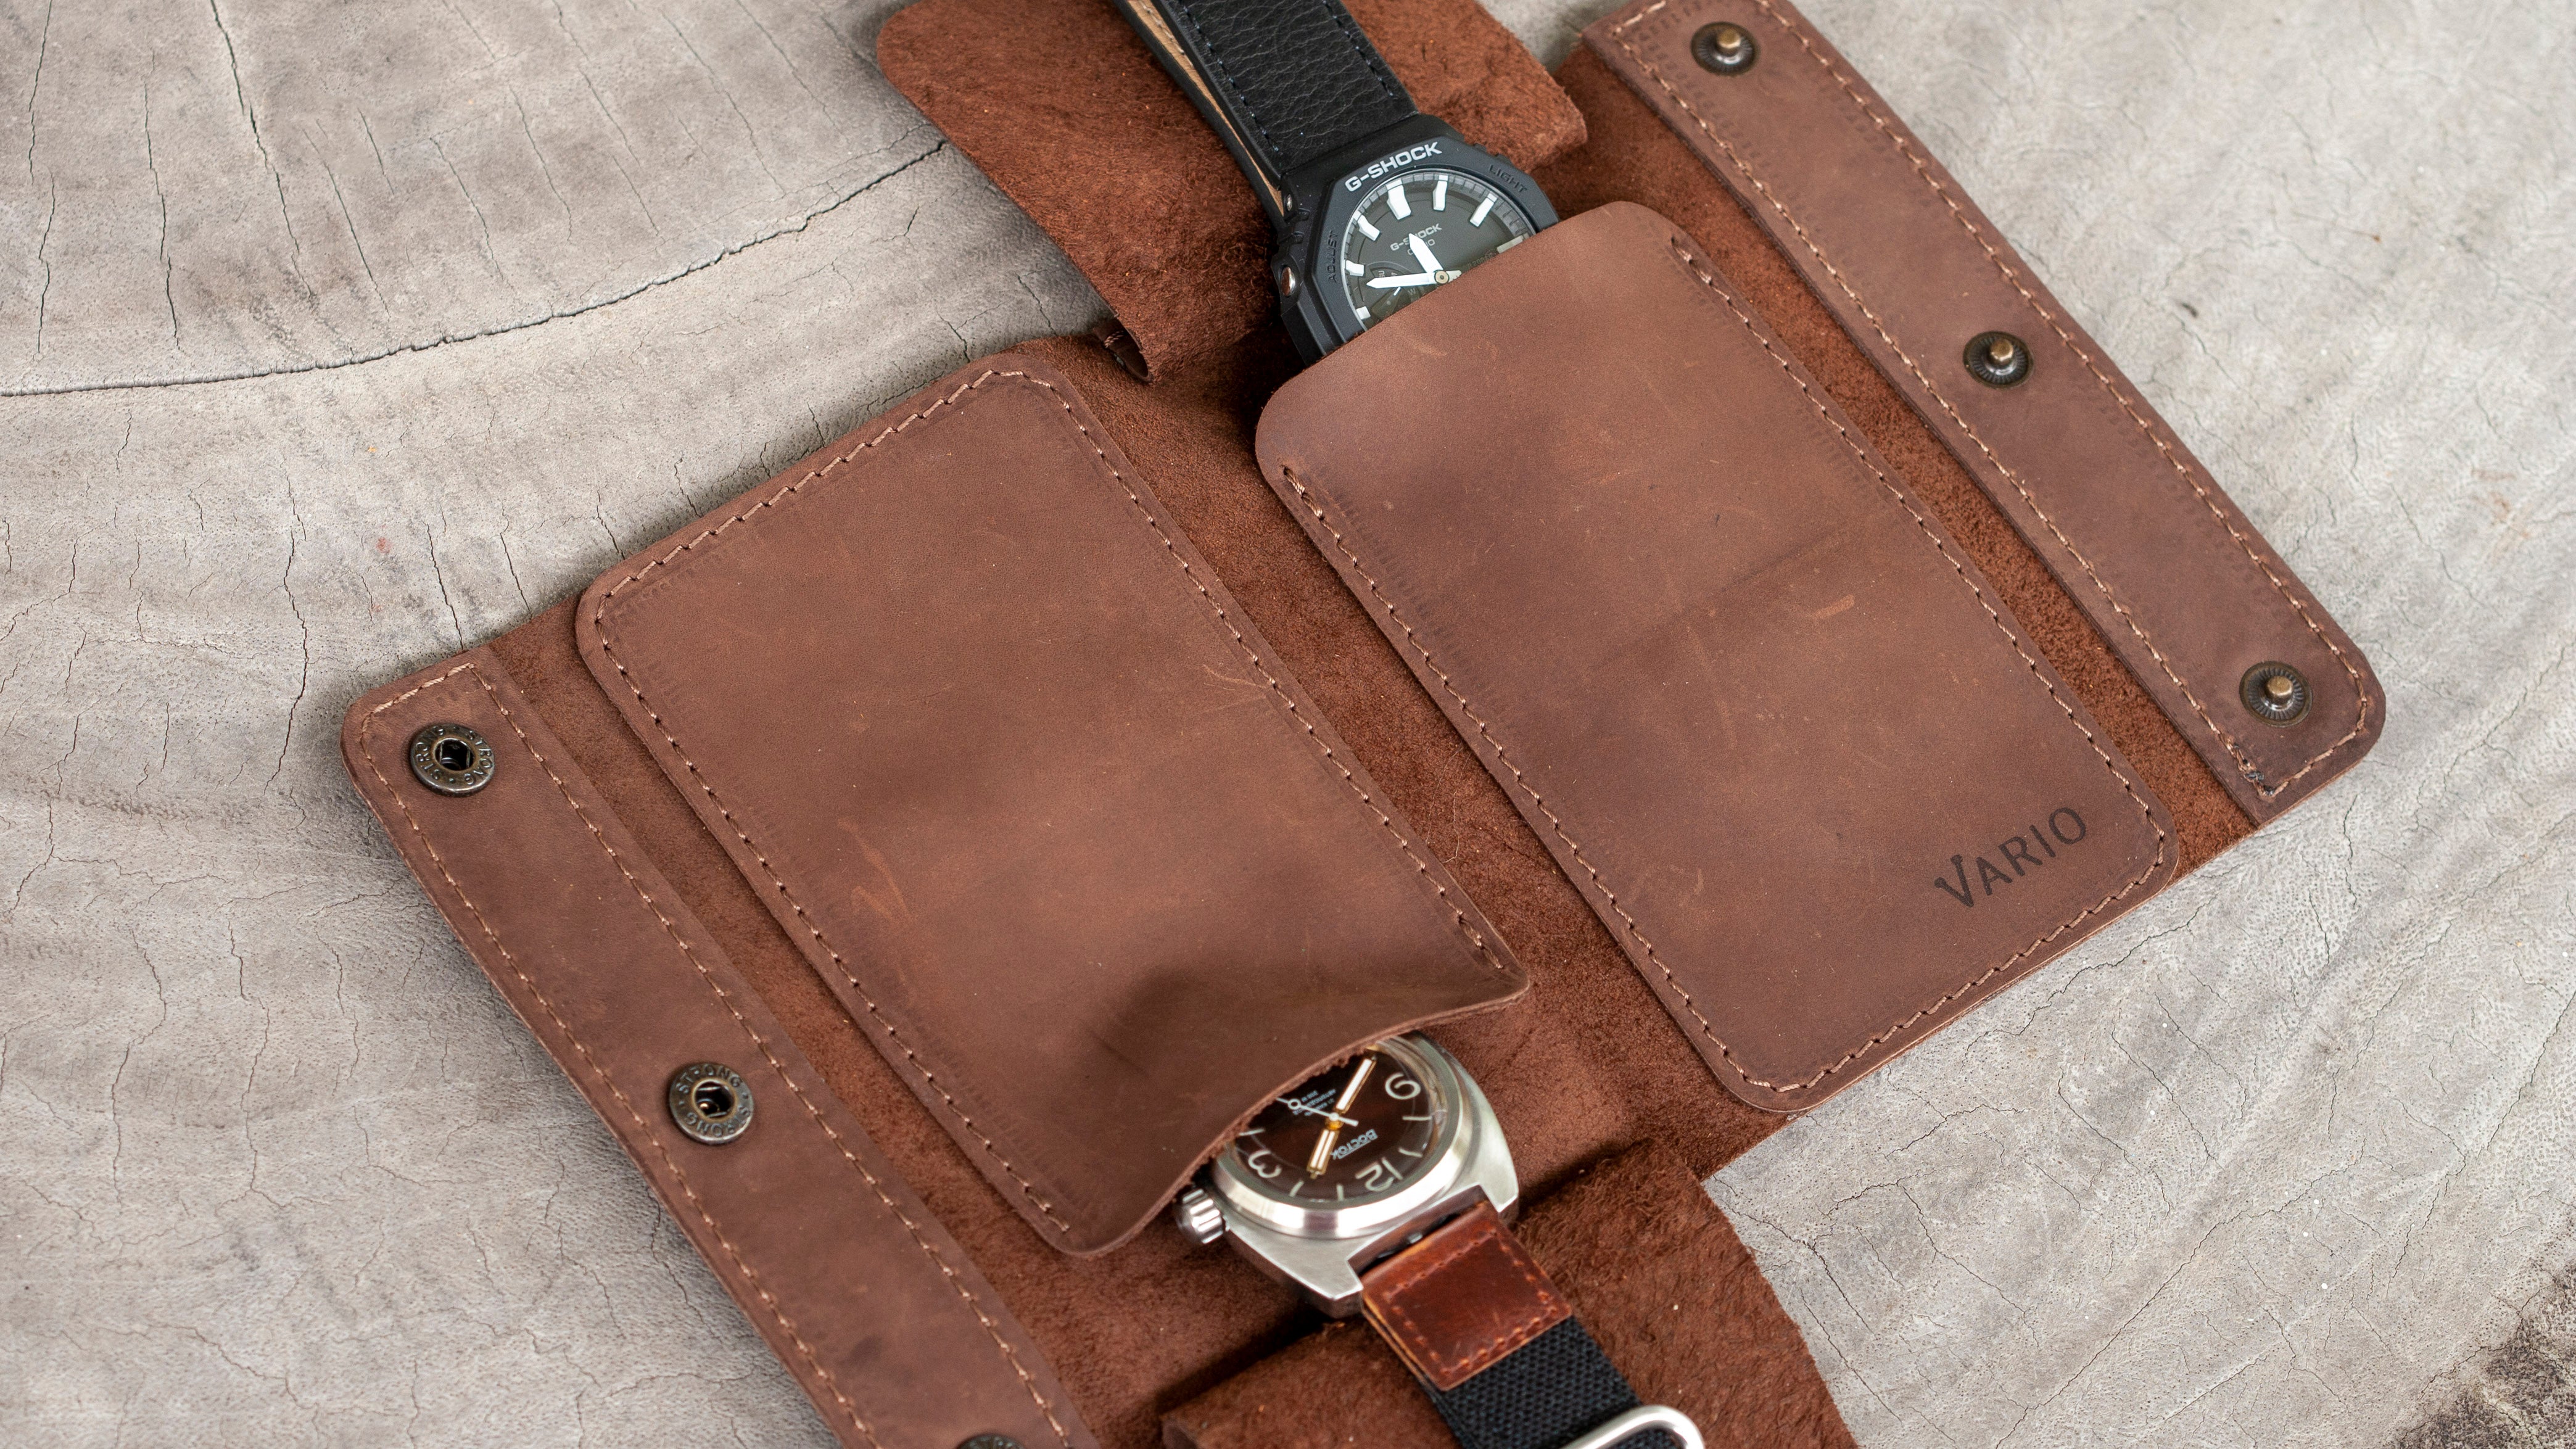 Vario Belarus Leather Watch Pouch 2 Pocket